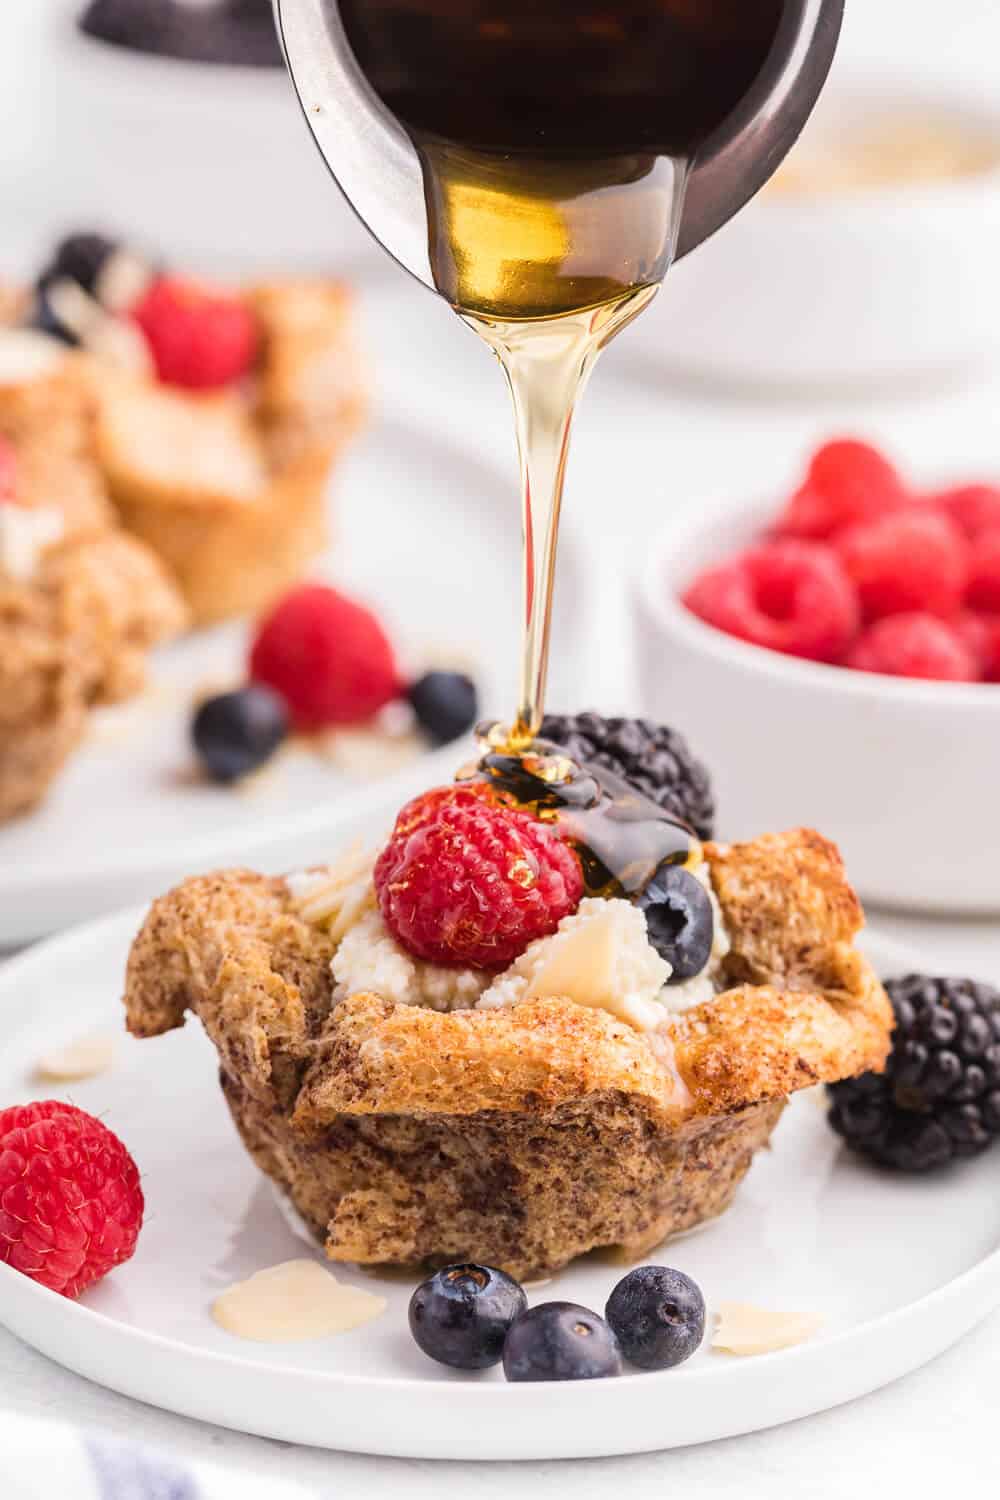 French Toast Cups - This easy breakfast recipe is the perfect sweet start to your day. Creamy ricotta with fresh berries and a drizzle of honey or maple syrup are a delicious breakfast treat.